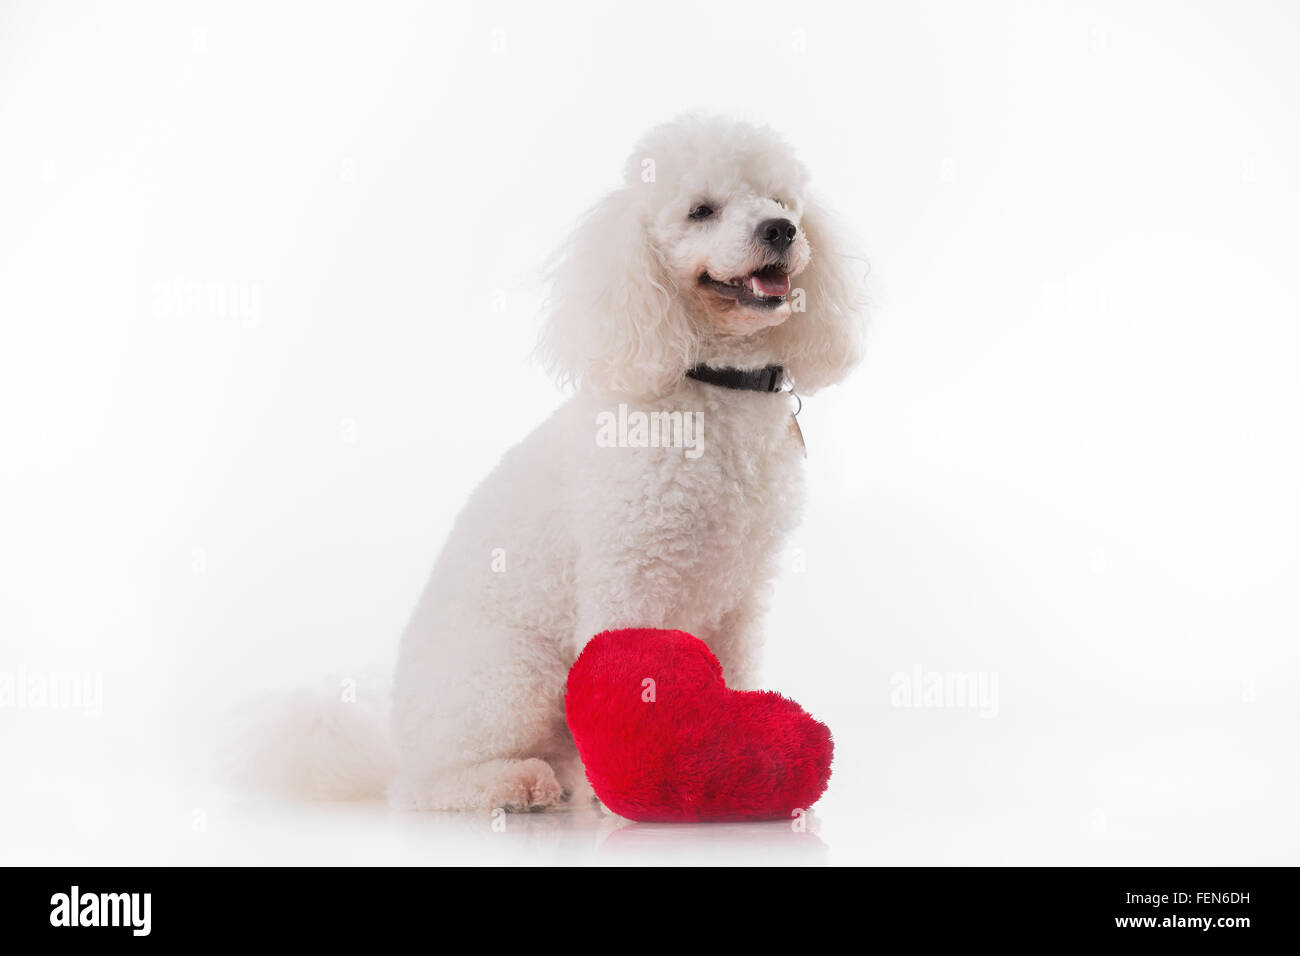 Cute puppy dog with a red heart isolated on white background. Stock Photo